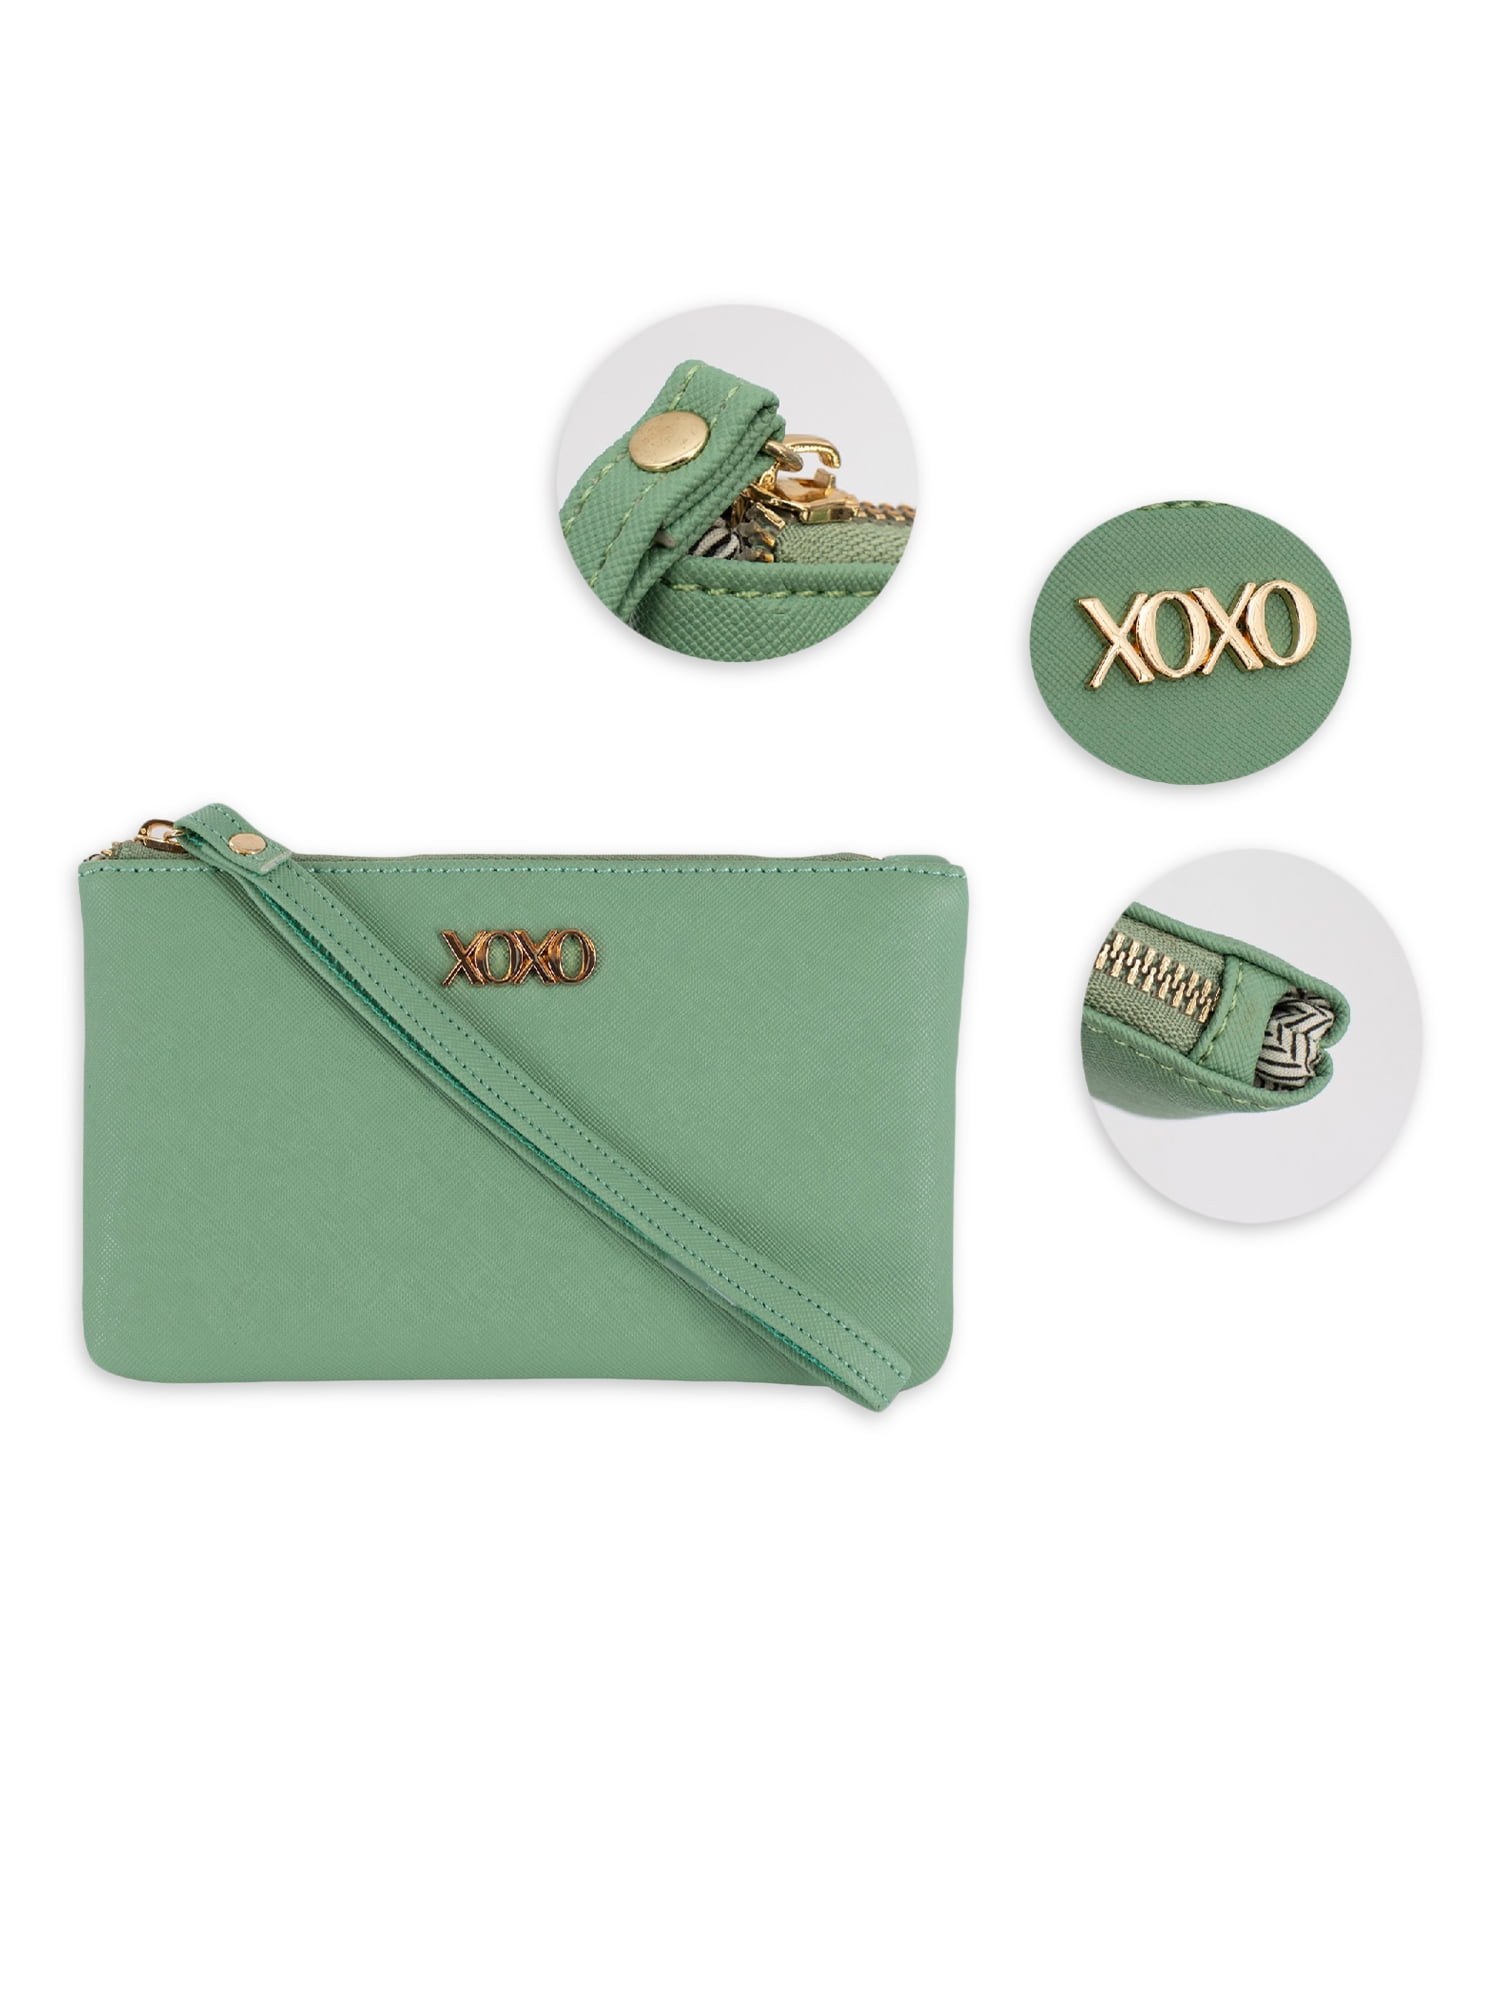  XOXO Wristlet Wallet for Women - Double Zip Vegan Leather Wallet  - Large Capacity Travel Clutch with Card Holders, 2 Cash Pockets and Phone  Slot - Ideal Gift for Her 